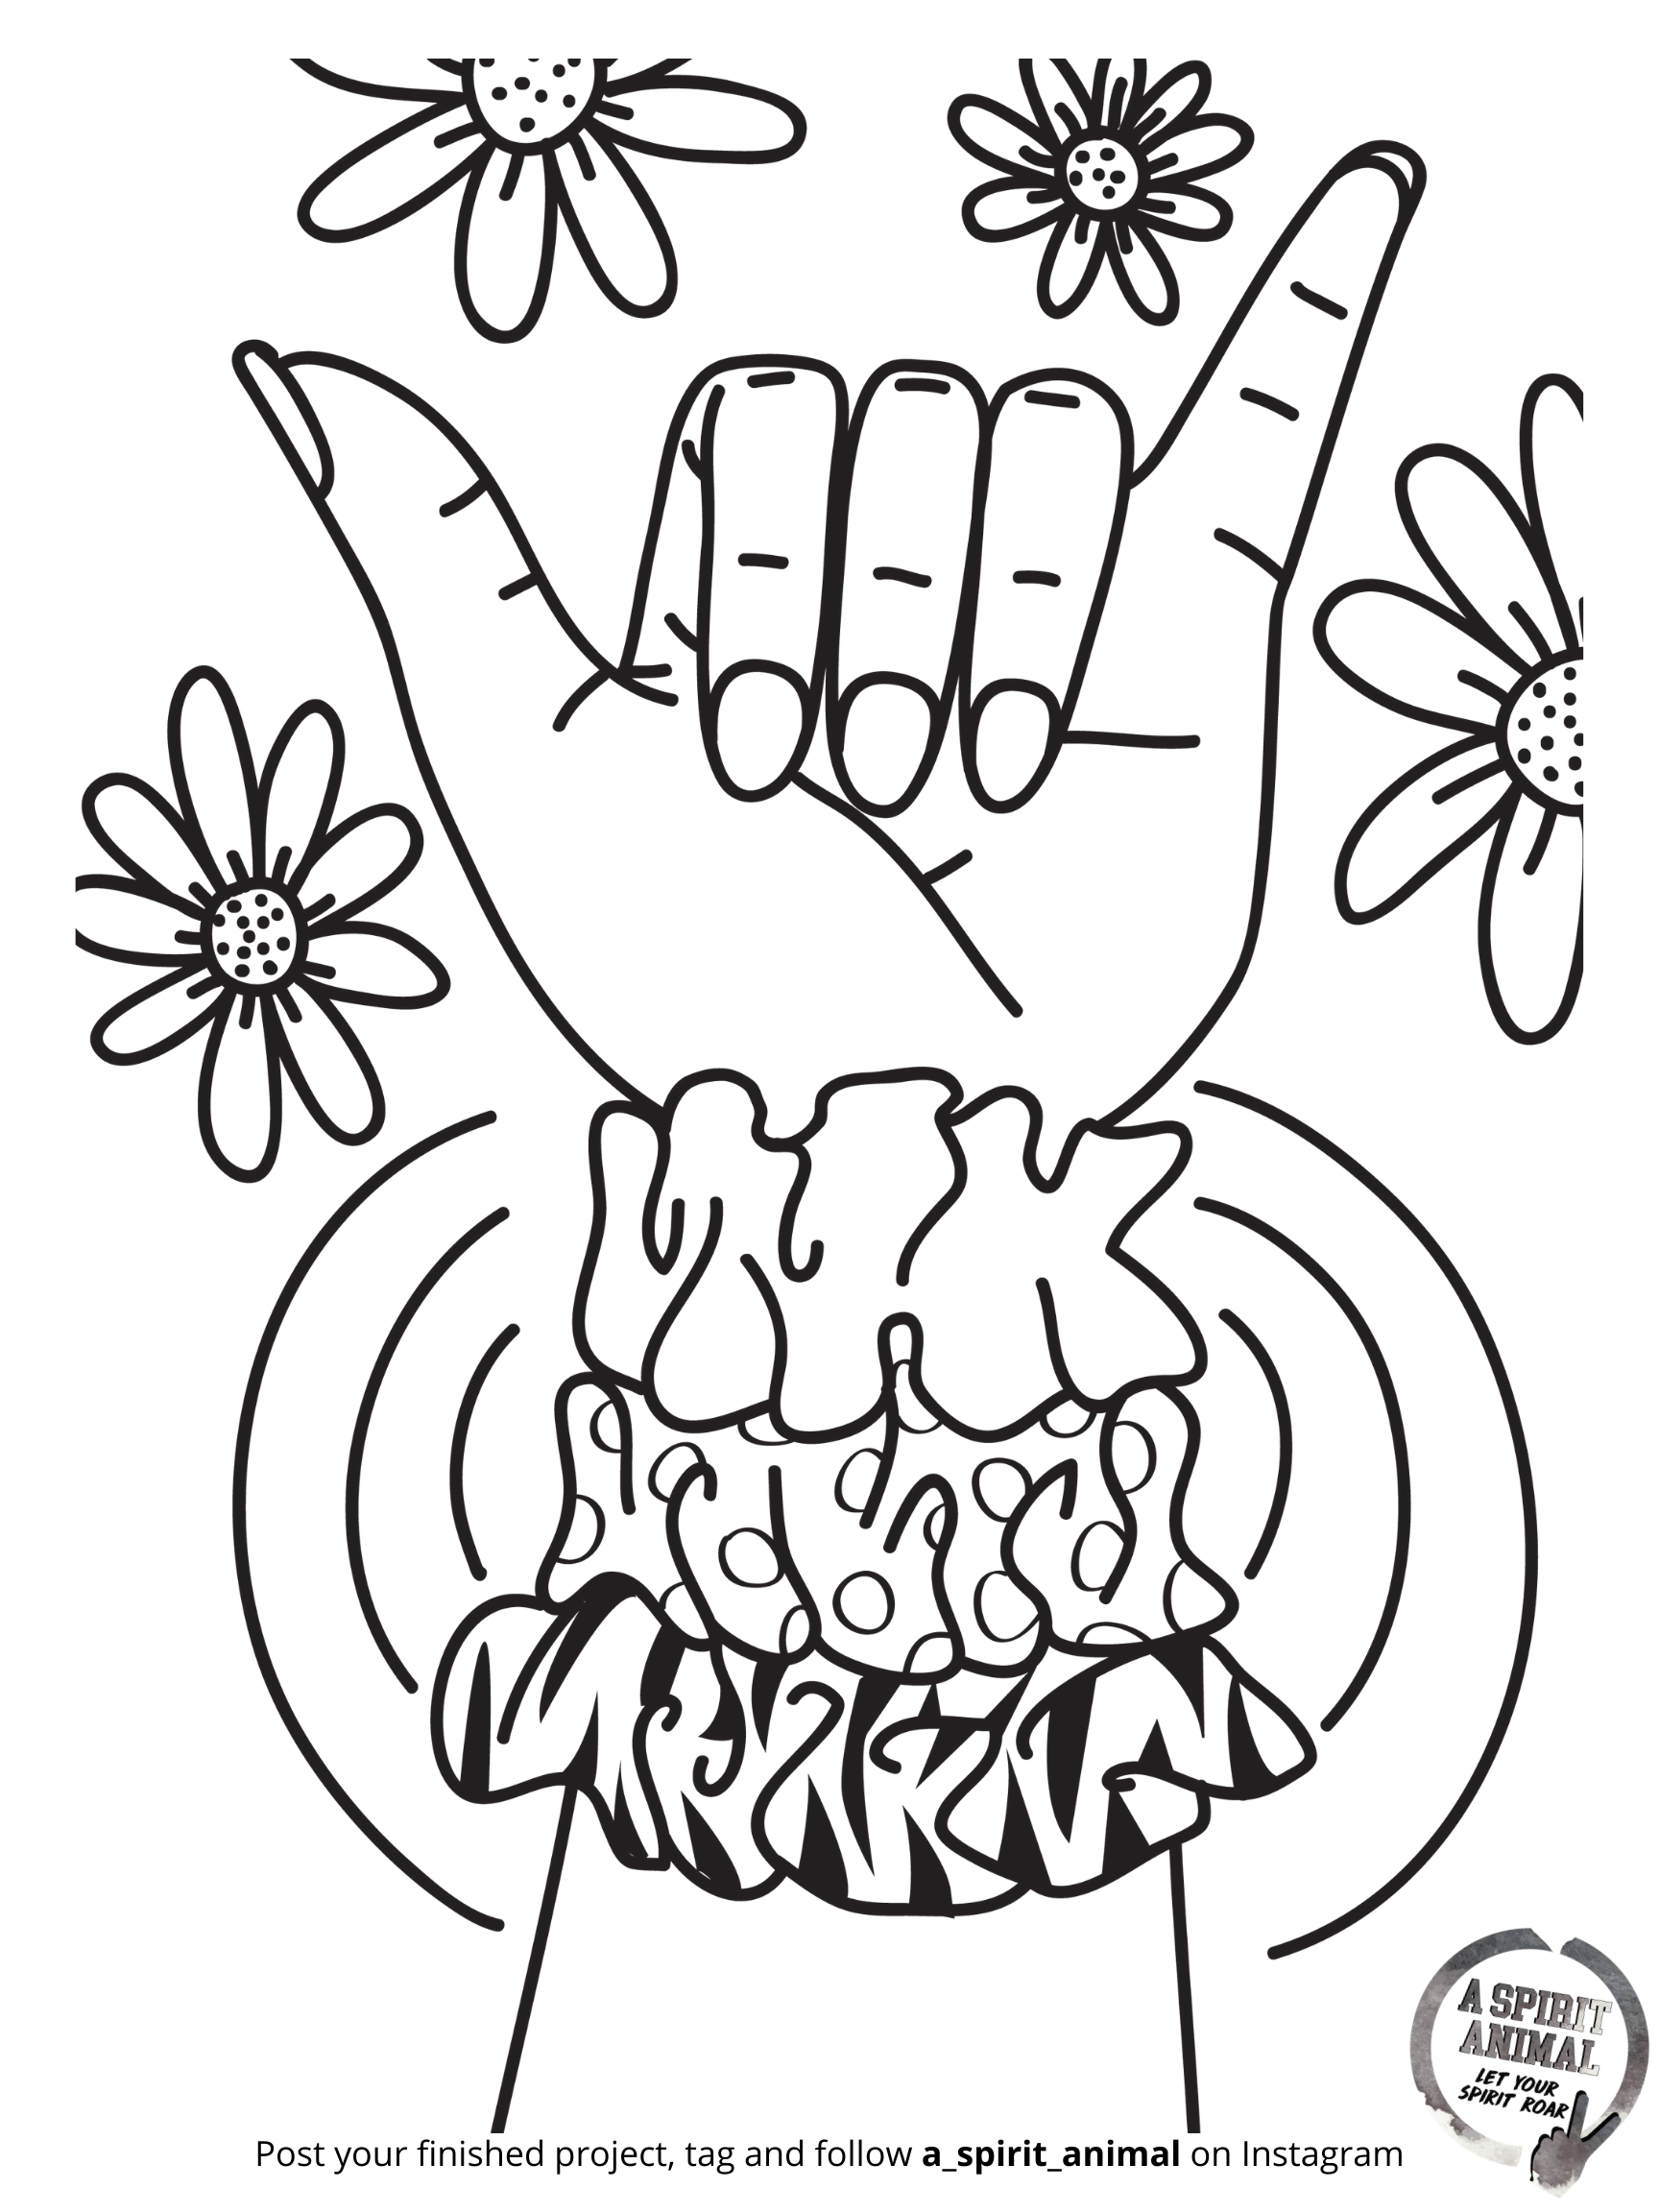 VSCO Girl Coloring Pages   Coloring Home